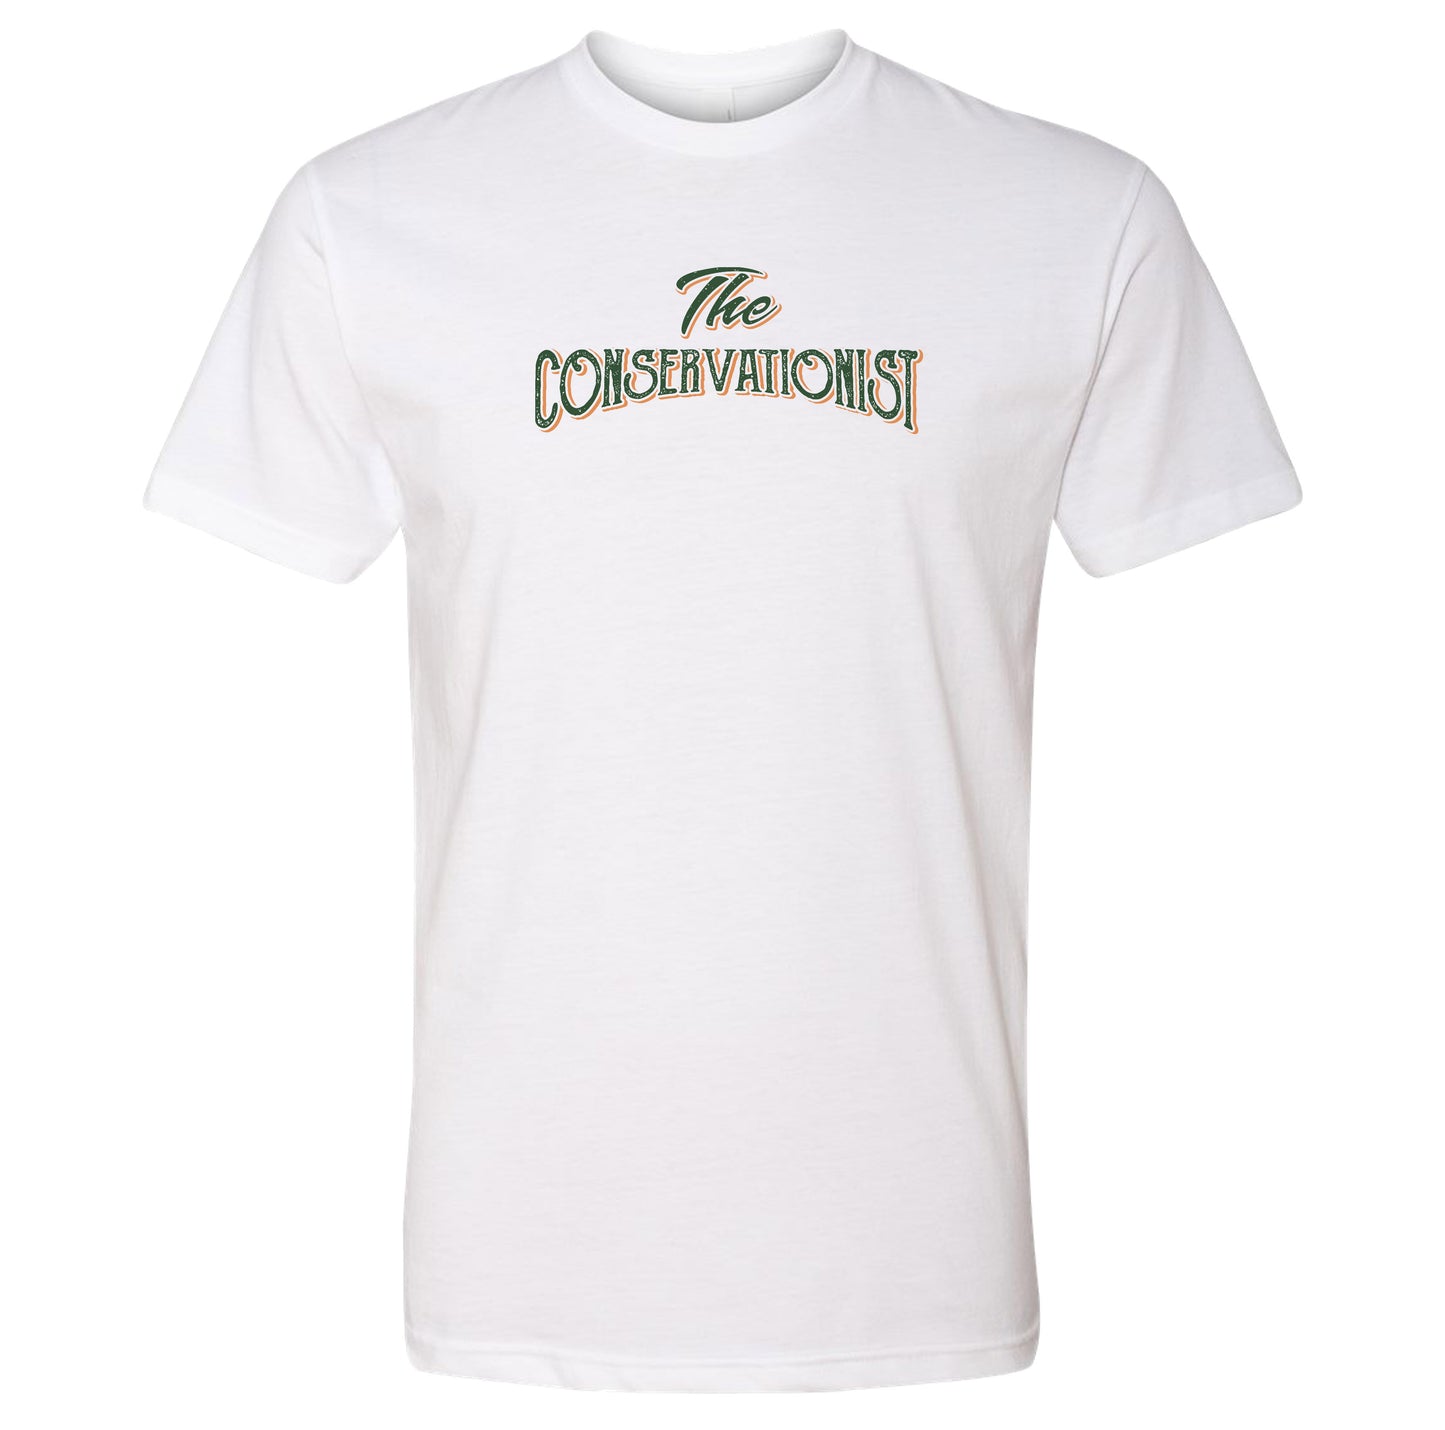 CR The Conservationist Tee